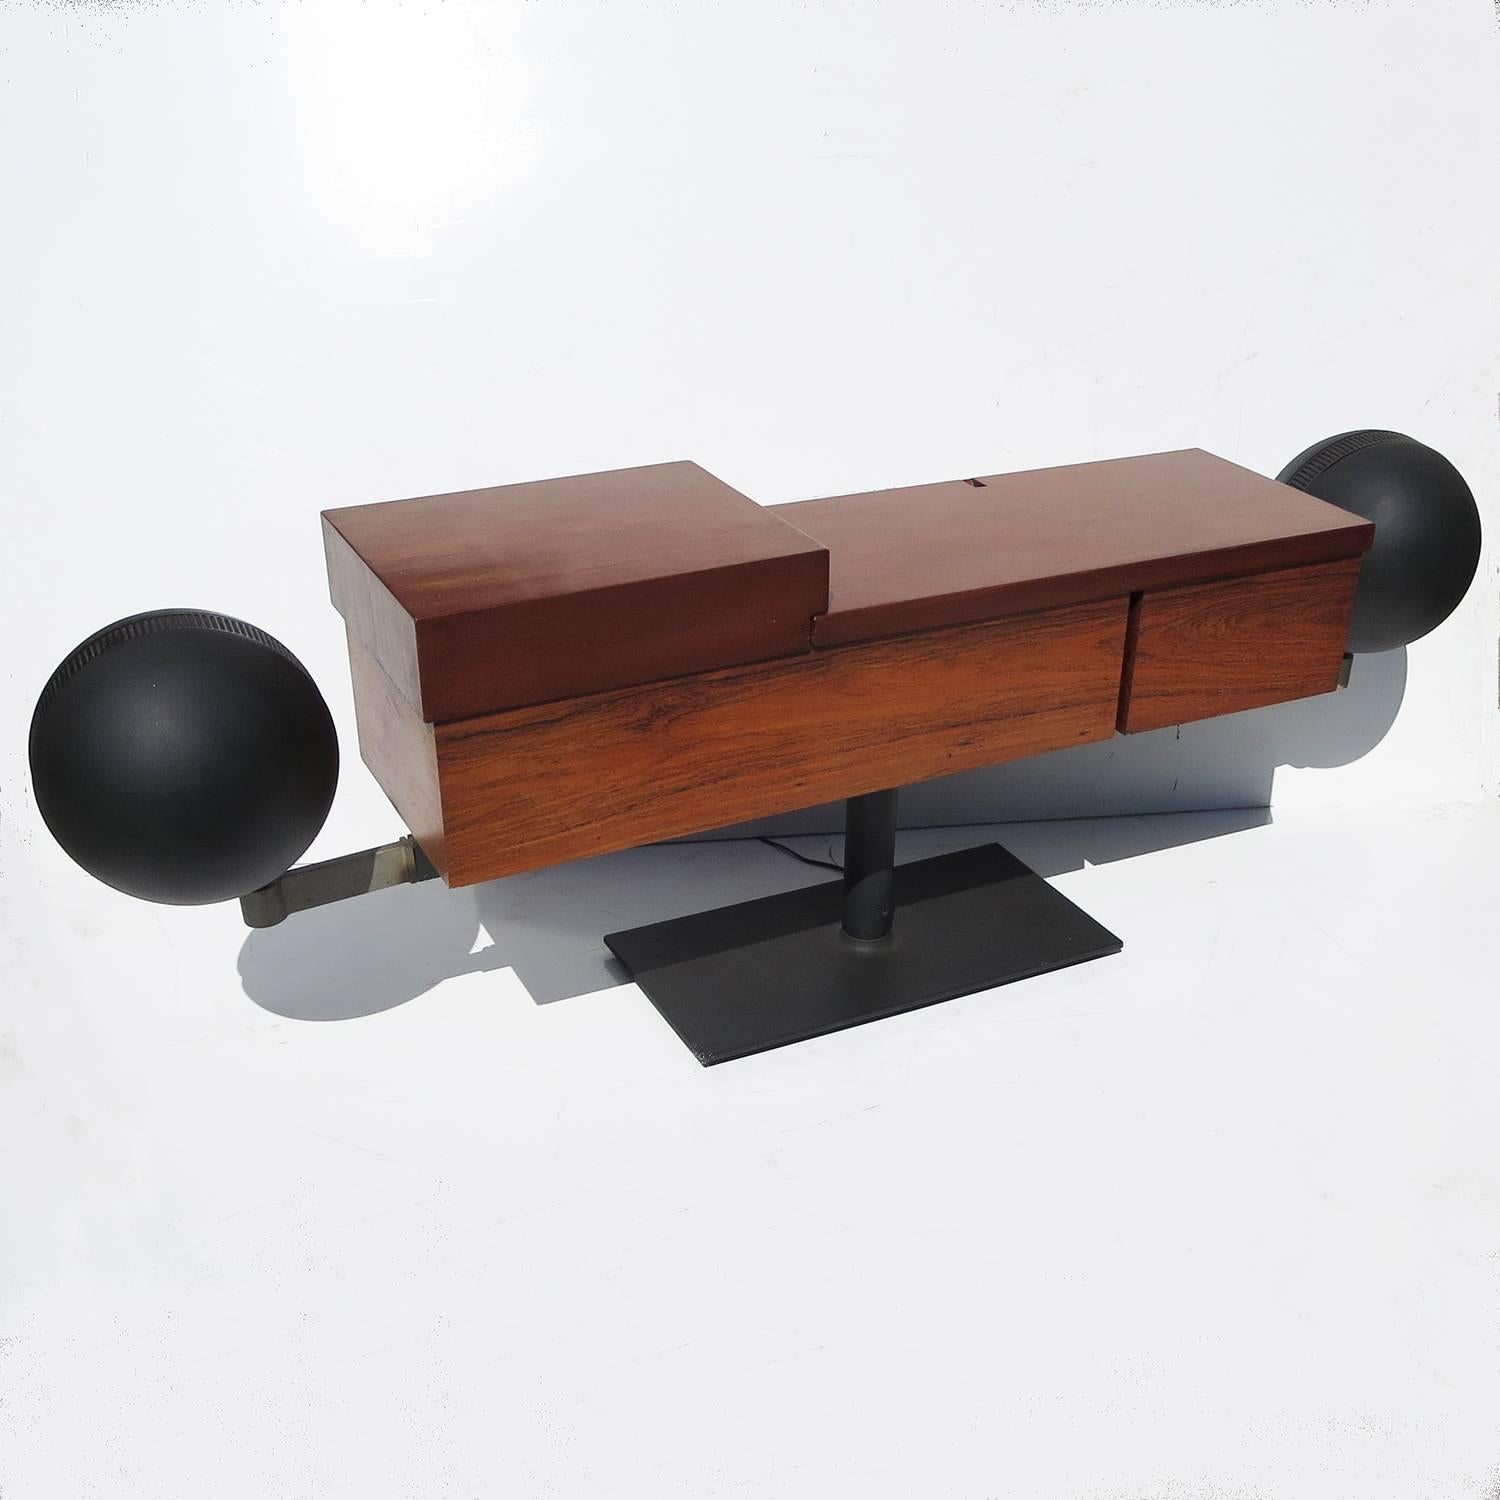 Founded in 1958, the Clairtone Sound Corporation of Canada began to make waves in the international design community immediately. Their modernistic cabinets clad in deep rosewood were unlike anything that came before or followed after. The Project G